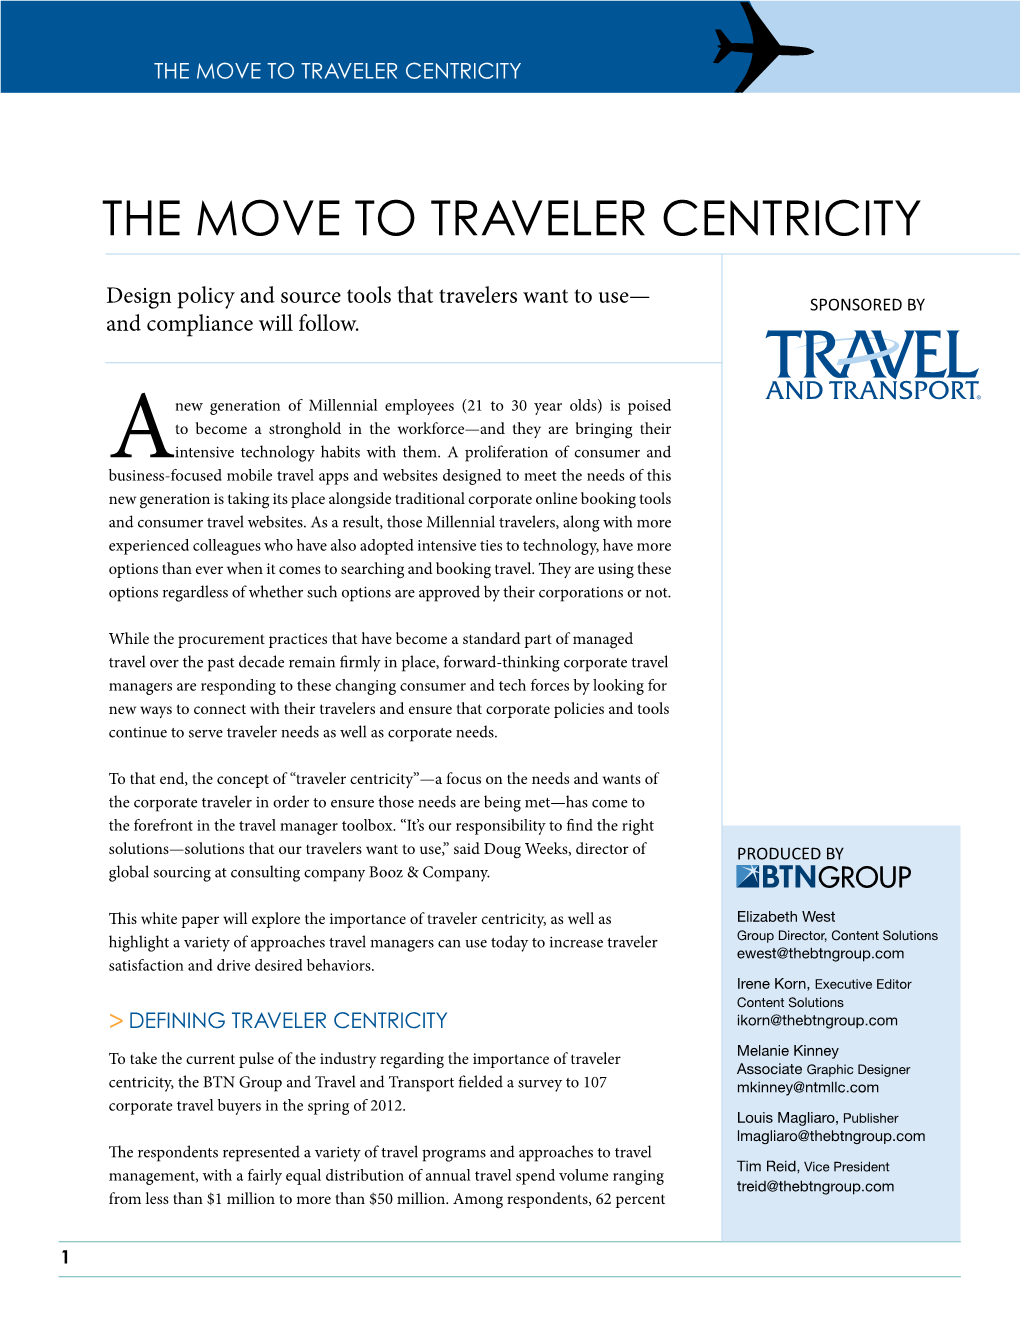 The Move to Traveler Centricity